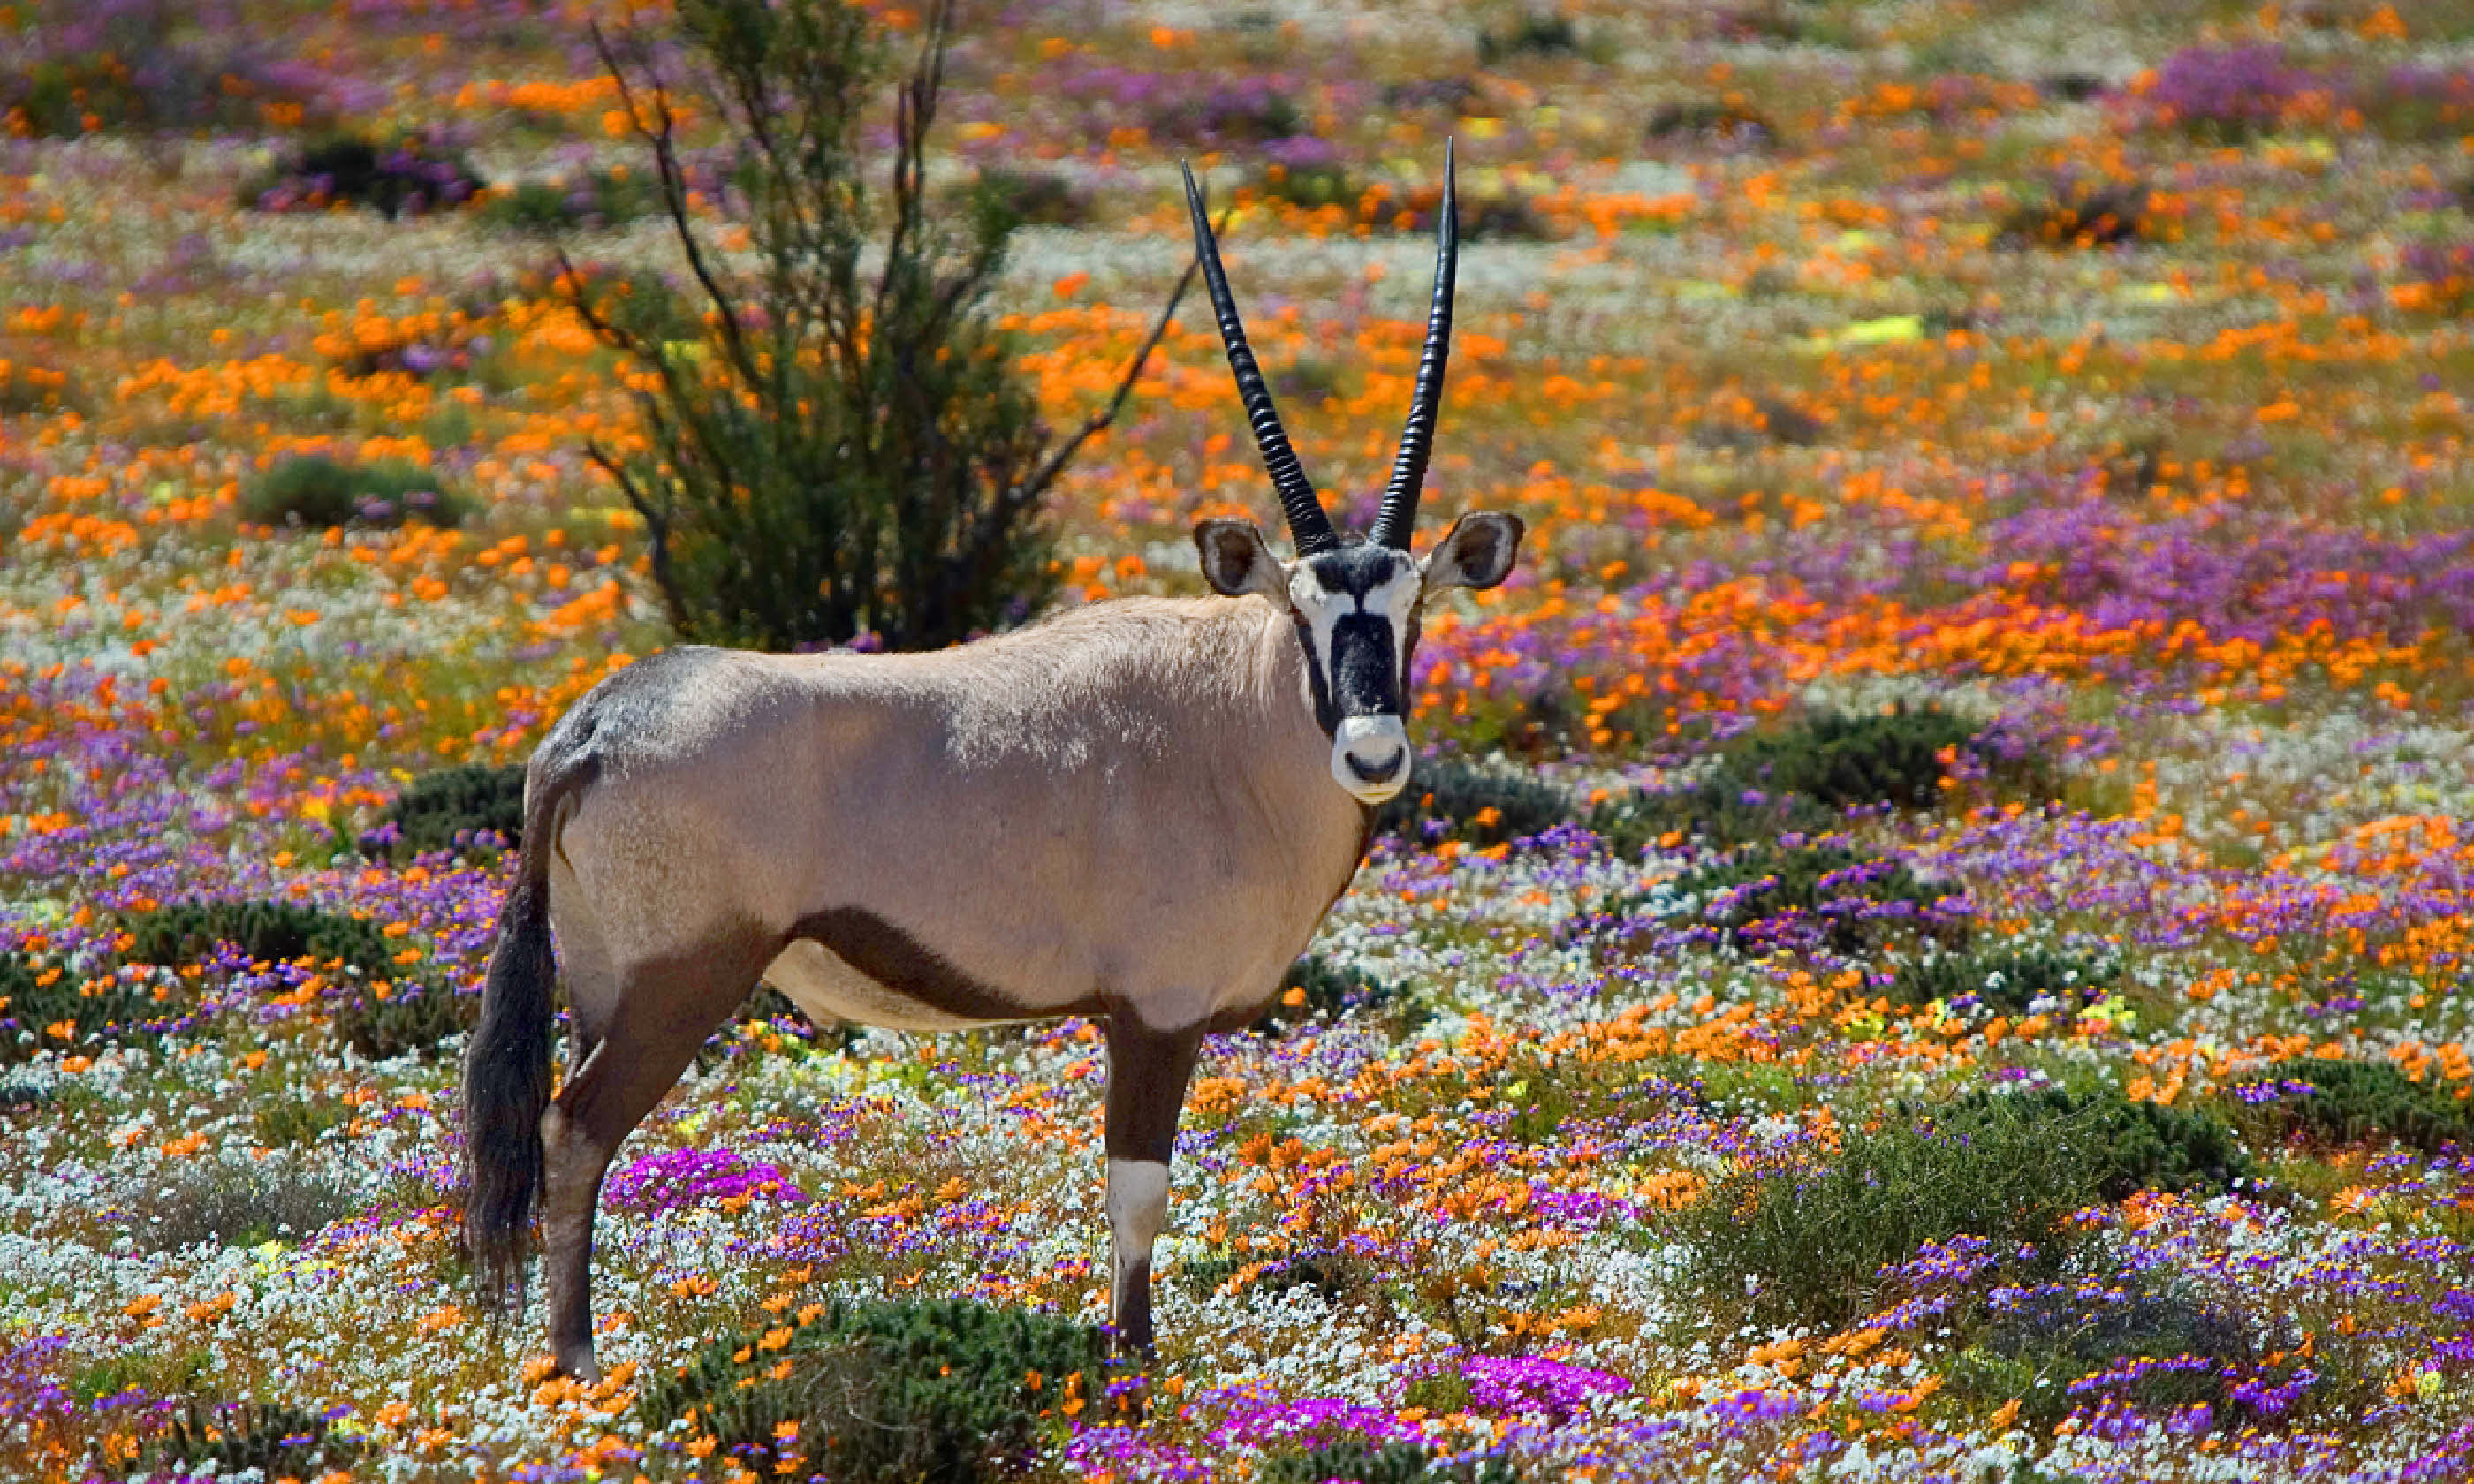 Oryx between flowers, Namaqualand, South Africa (Shutterstock: see credit below)